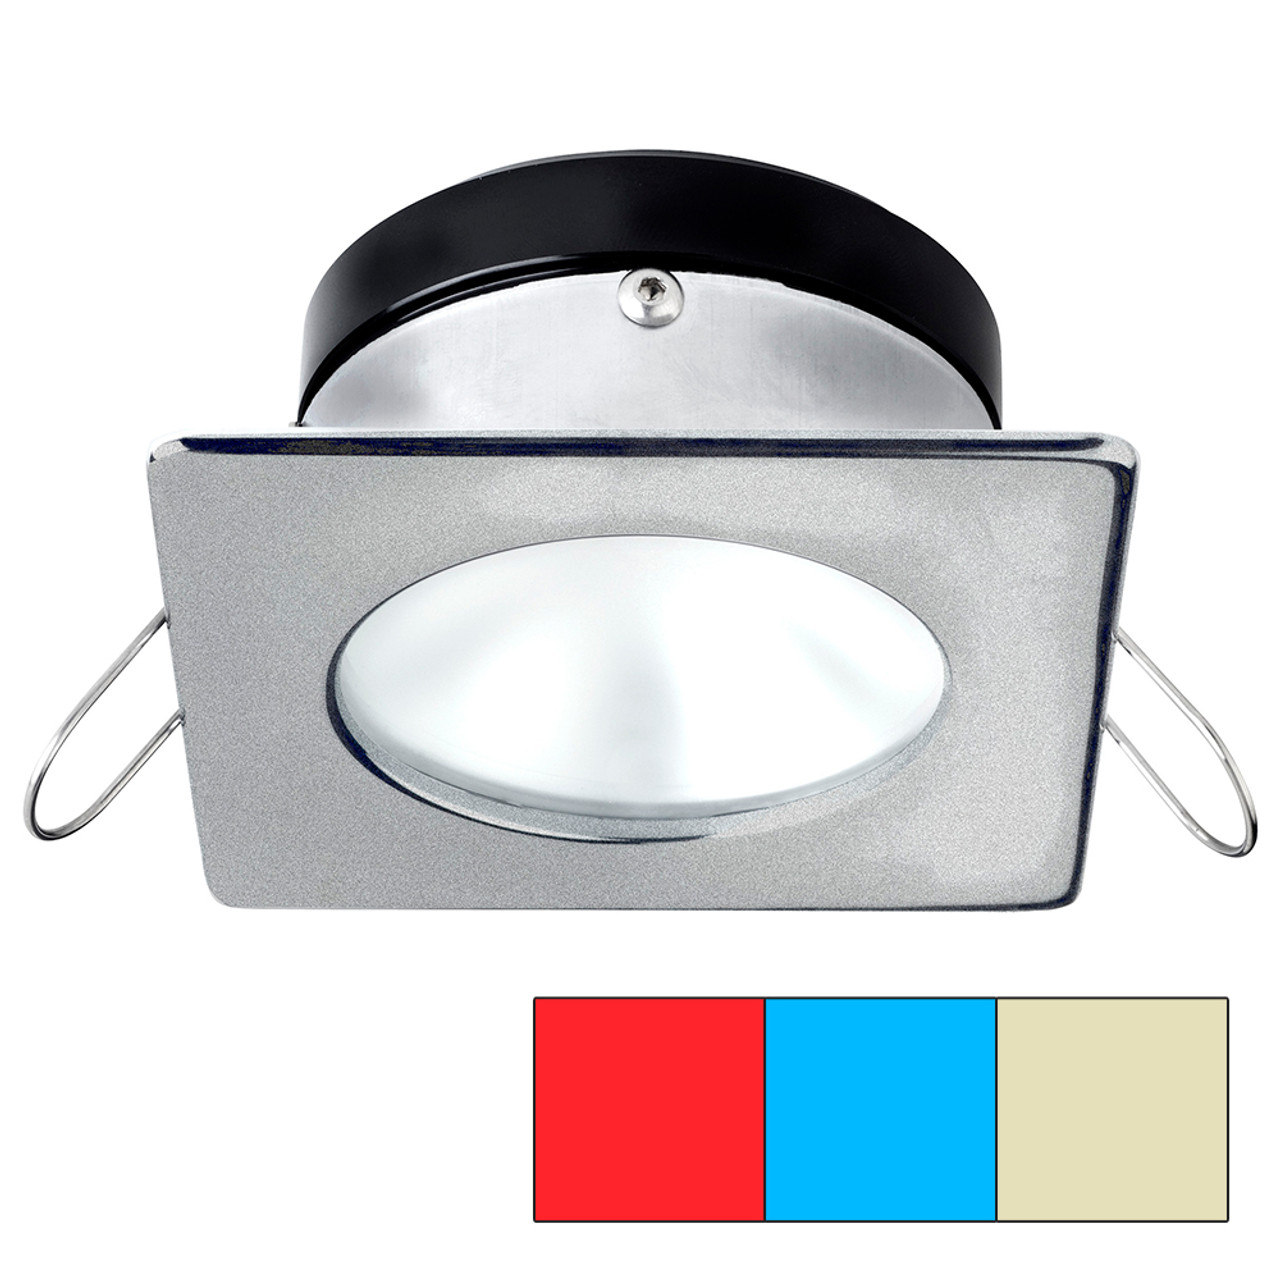 i2Systems - Apeiron A1120 - Spring Mount, Square/Round, Red/Warm White/Blue, Brushed Nickel - Apollo Lighting